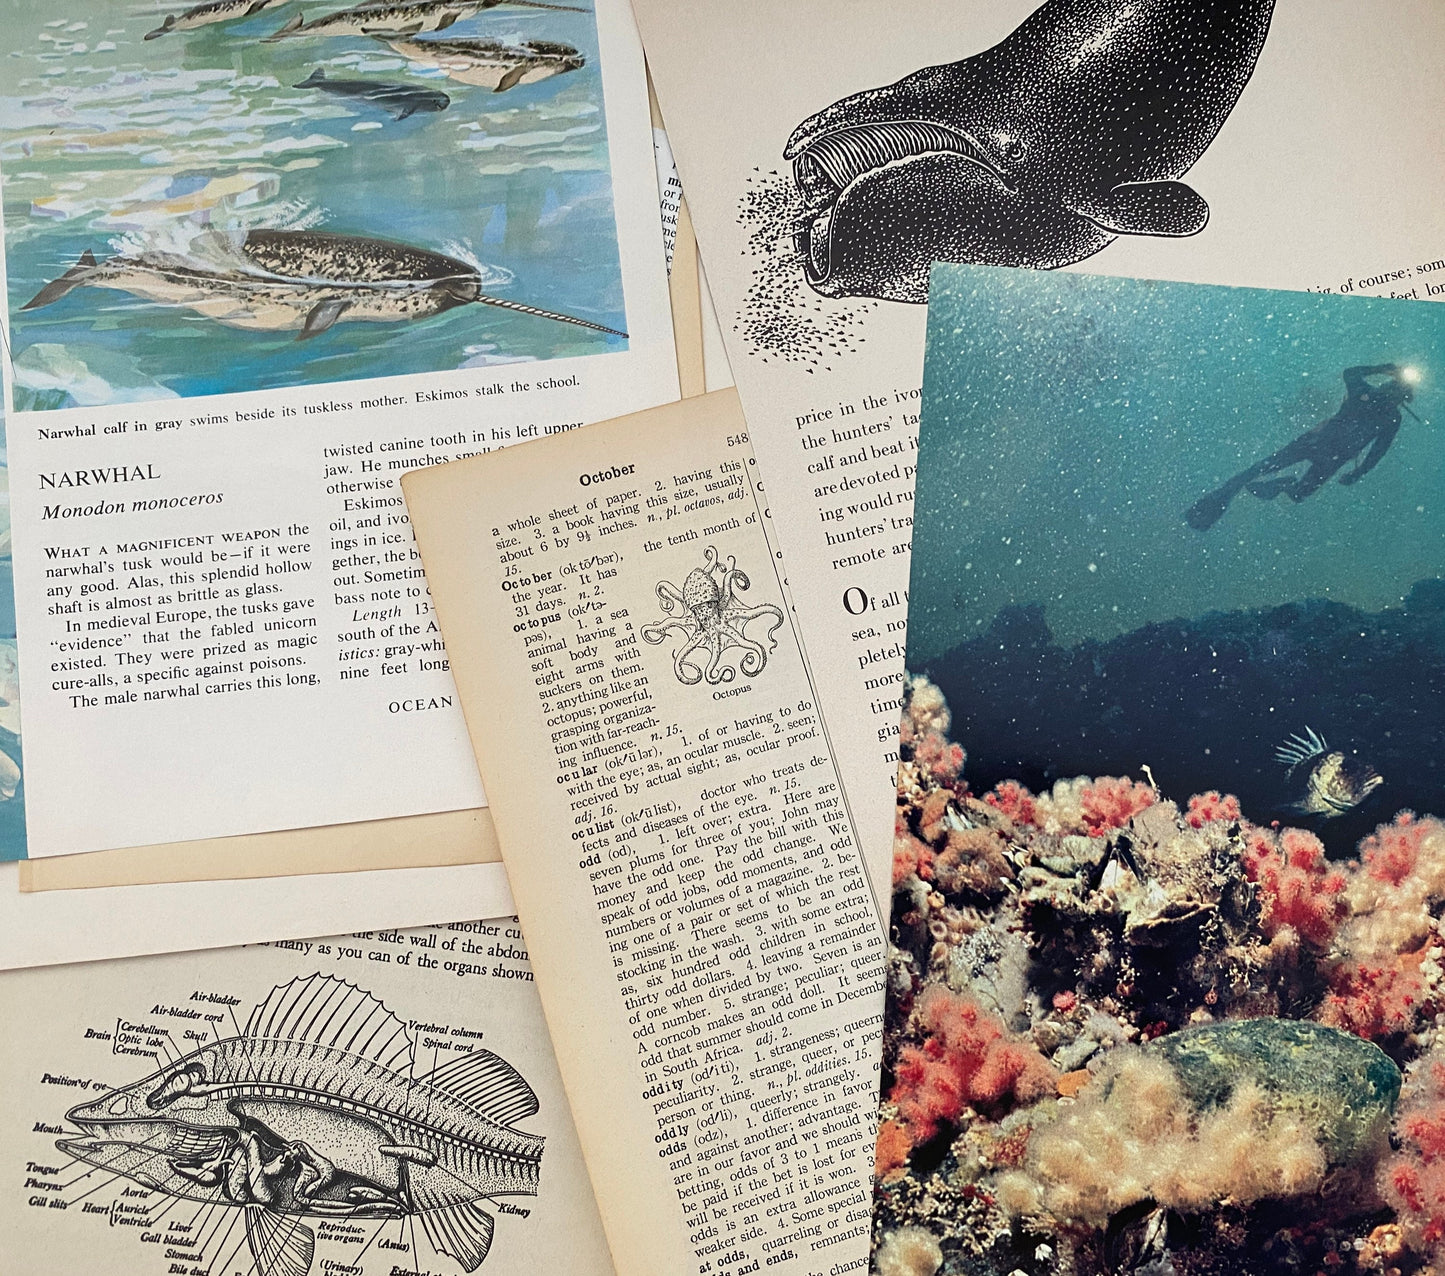 UNDER THE SEA: 1/8 lb of vintage fish & related book pages and papers for art, collage, junk journal, scrapbook, craft